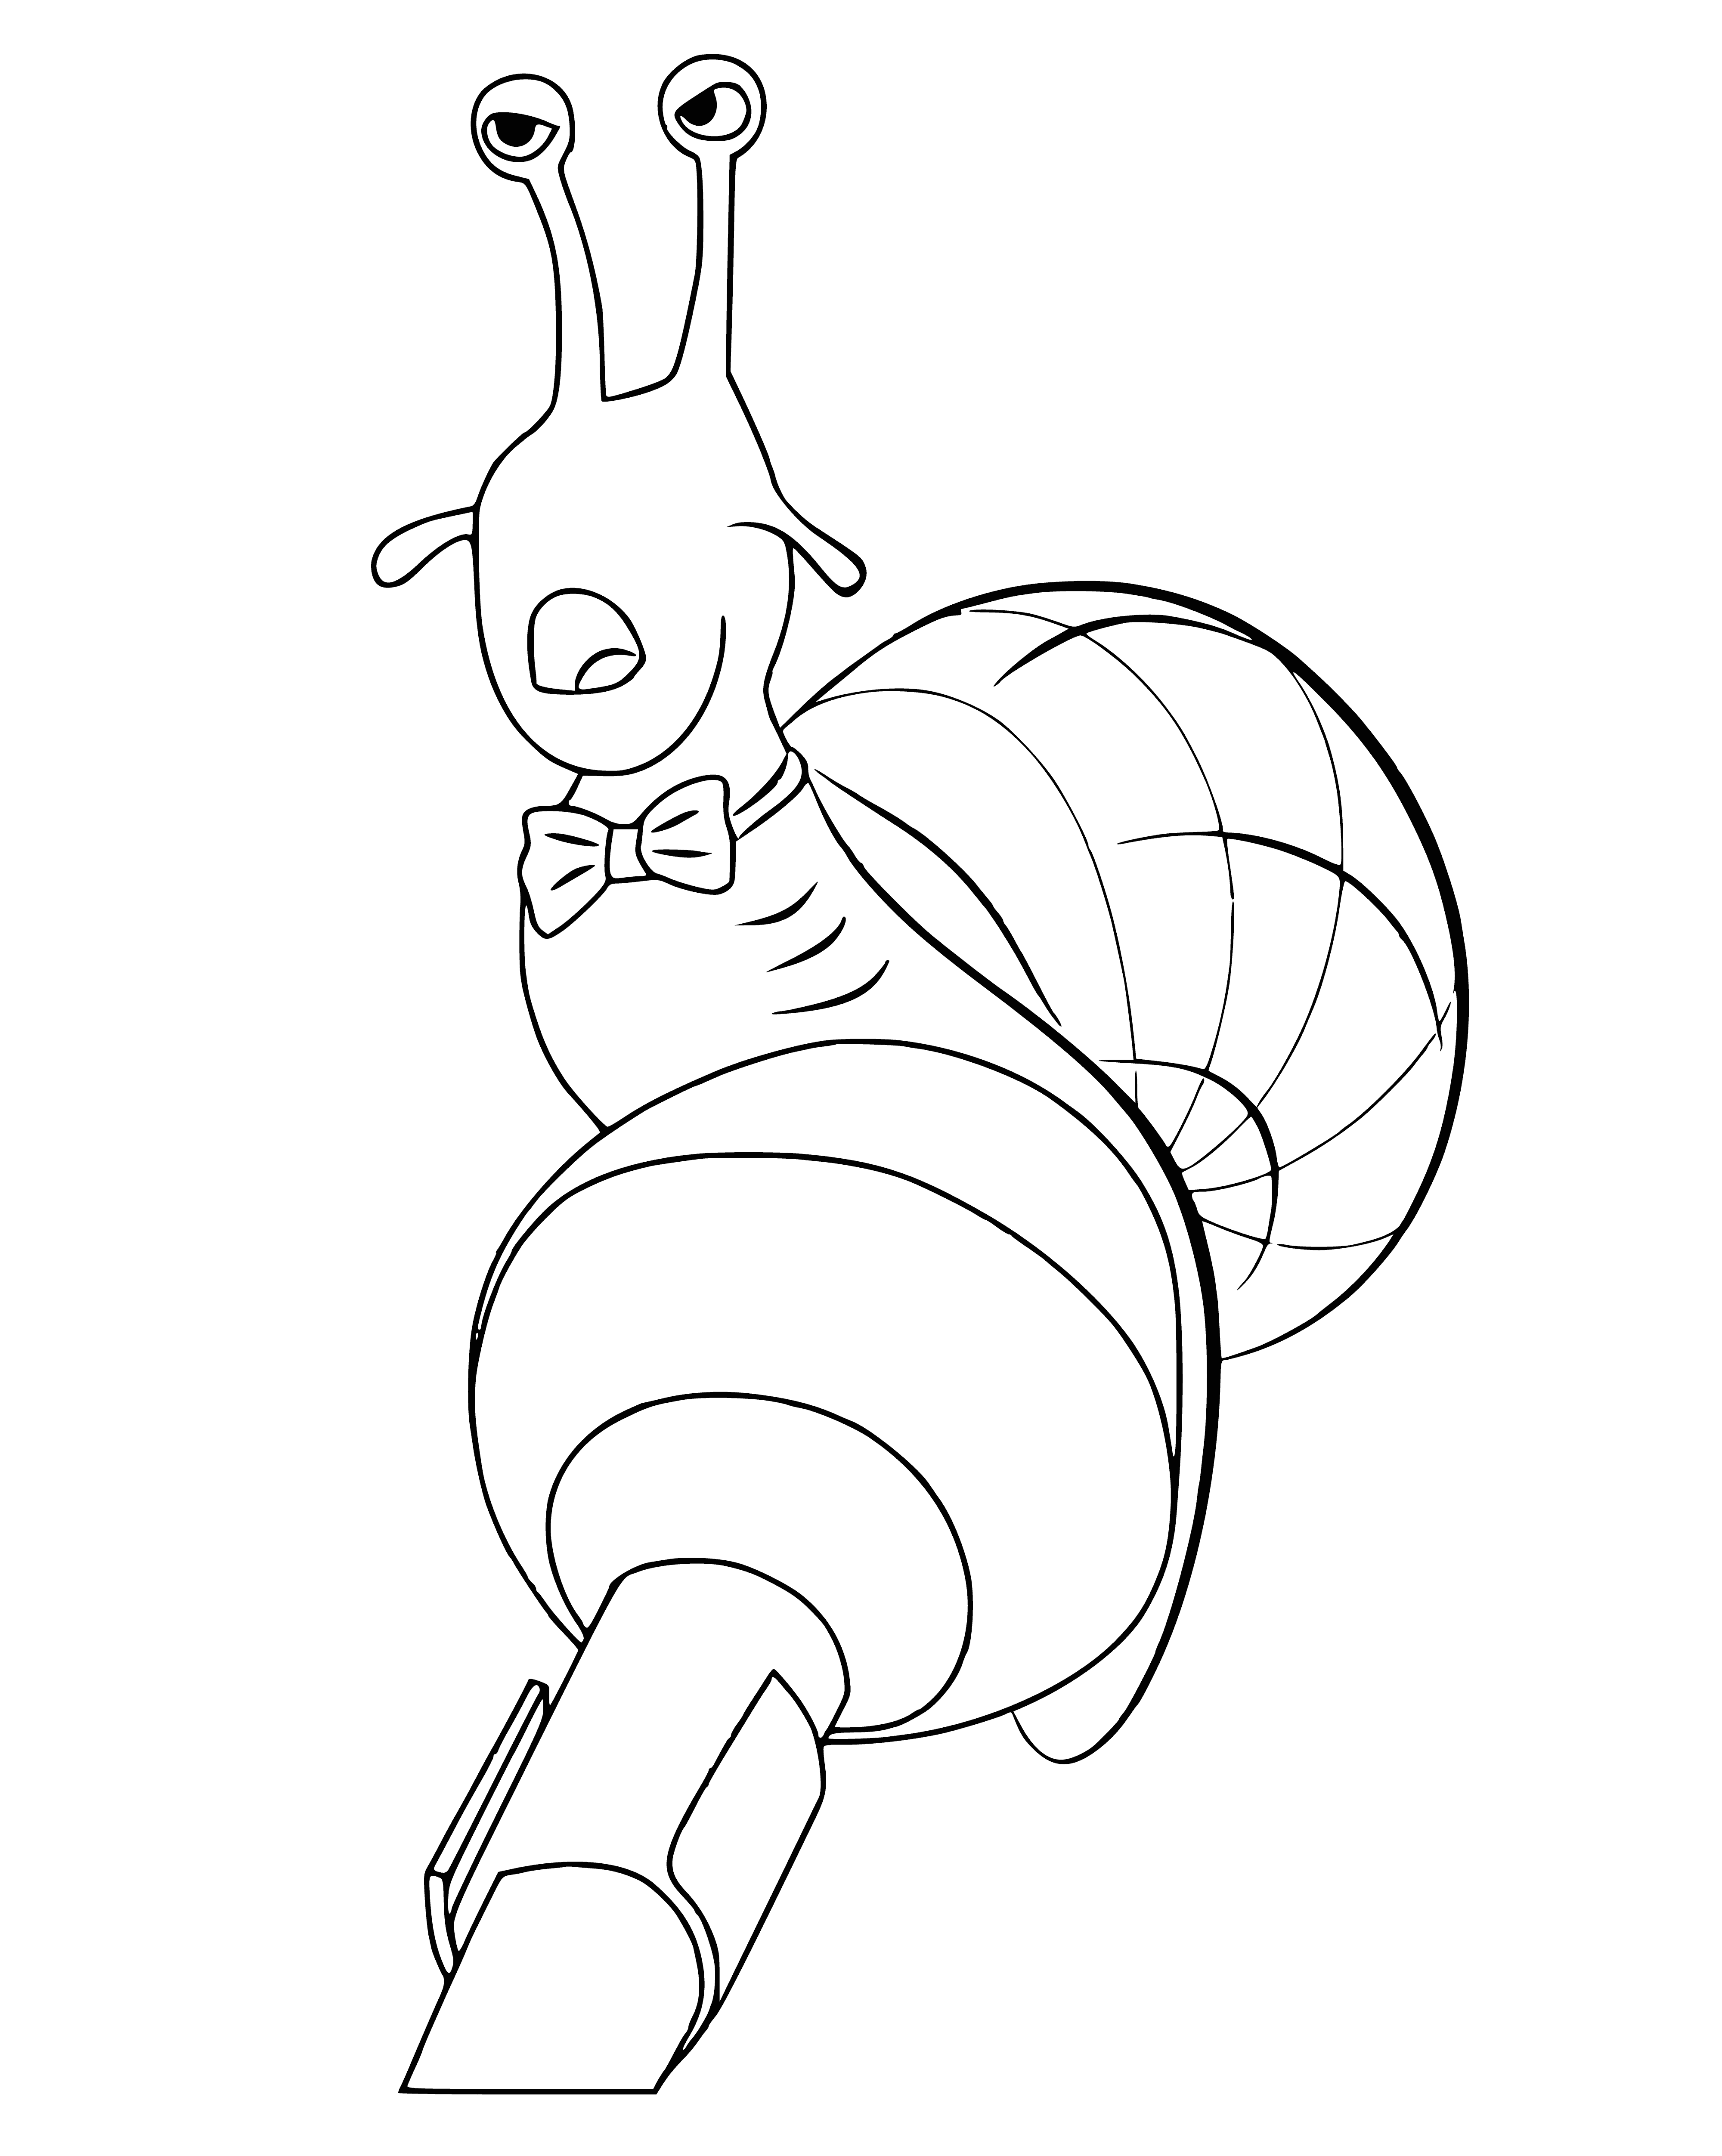 coloring page: Snail on green leaf with yellow flower has brown/white shell; eyes on head; long, thin, brown/white body; head facing left.